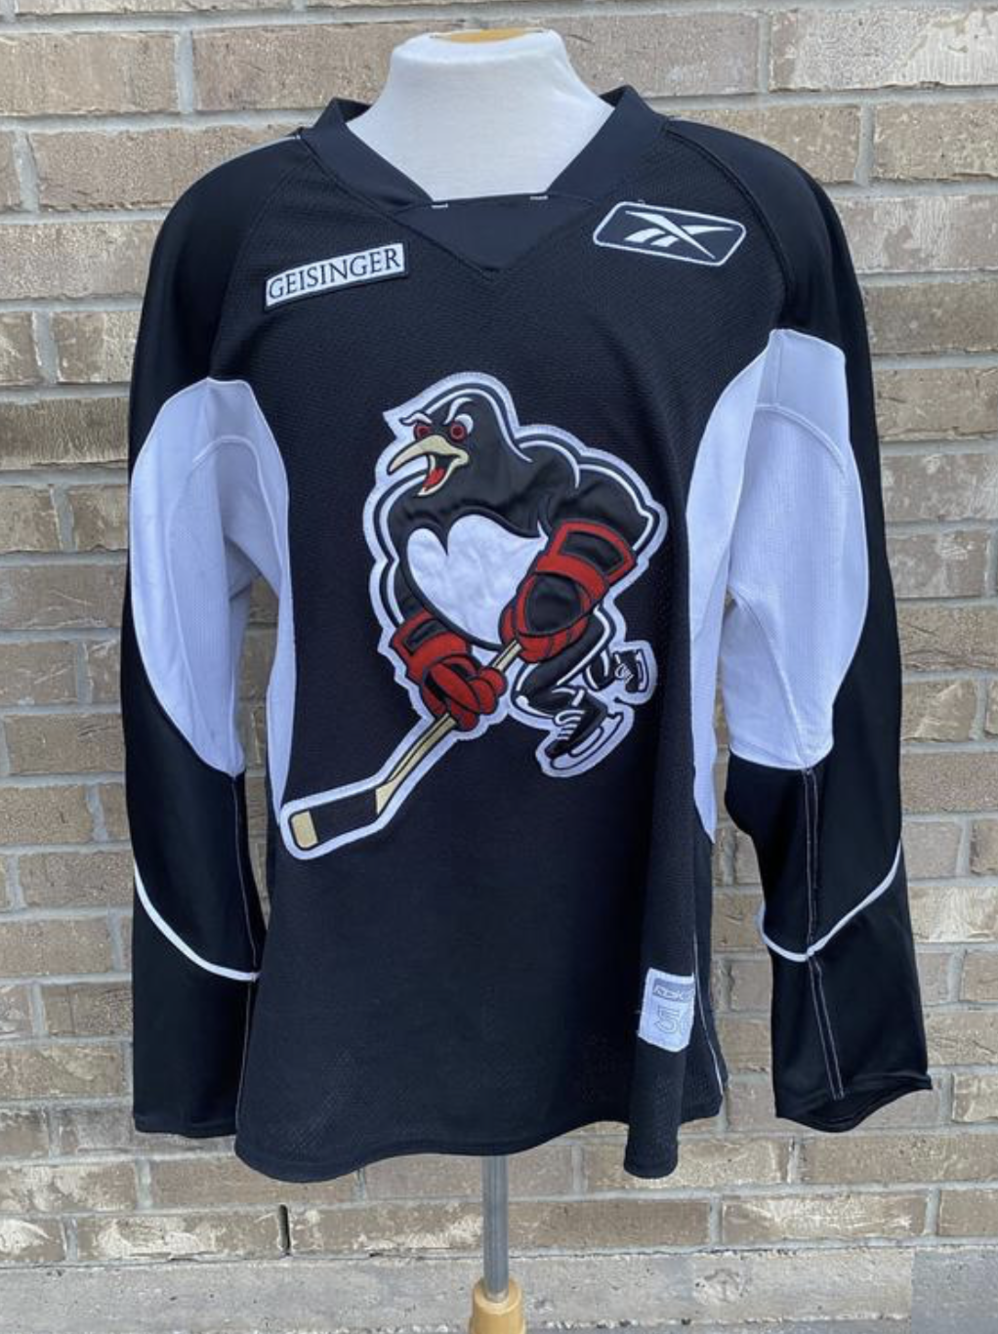 Wilkes-Barre/Scranton was having a jersey design contest for a new